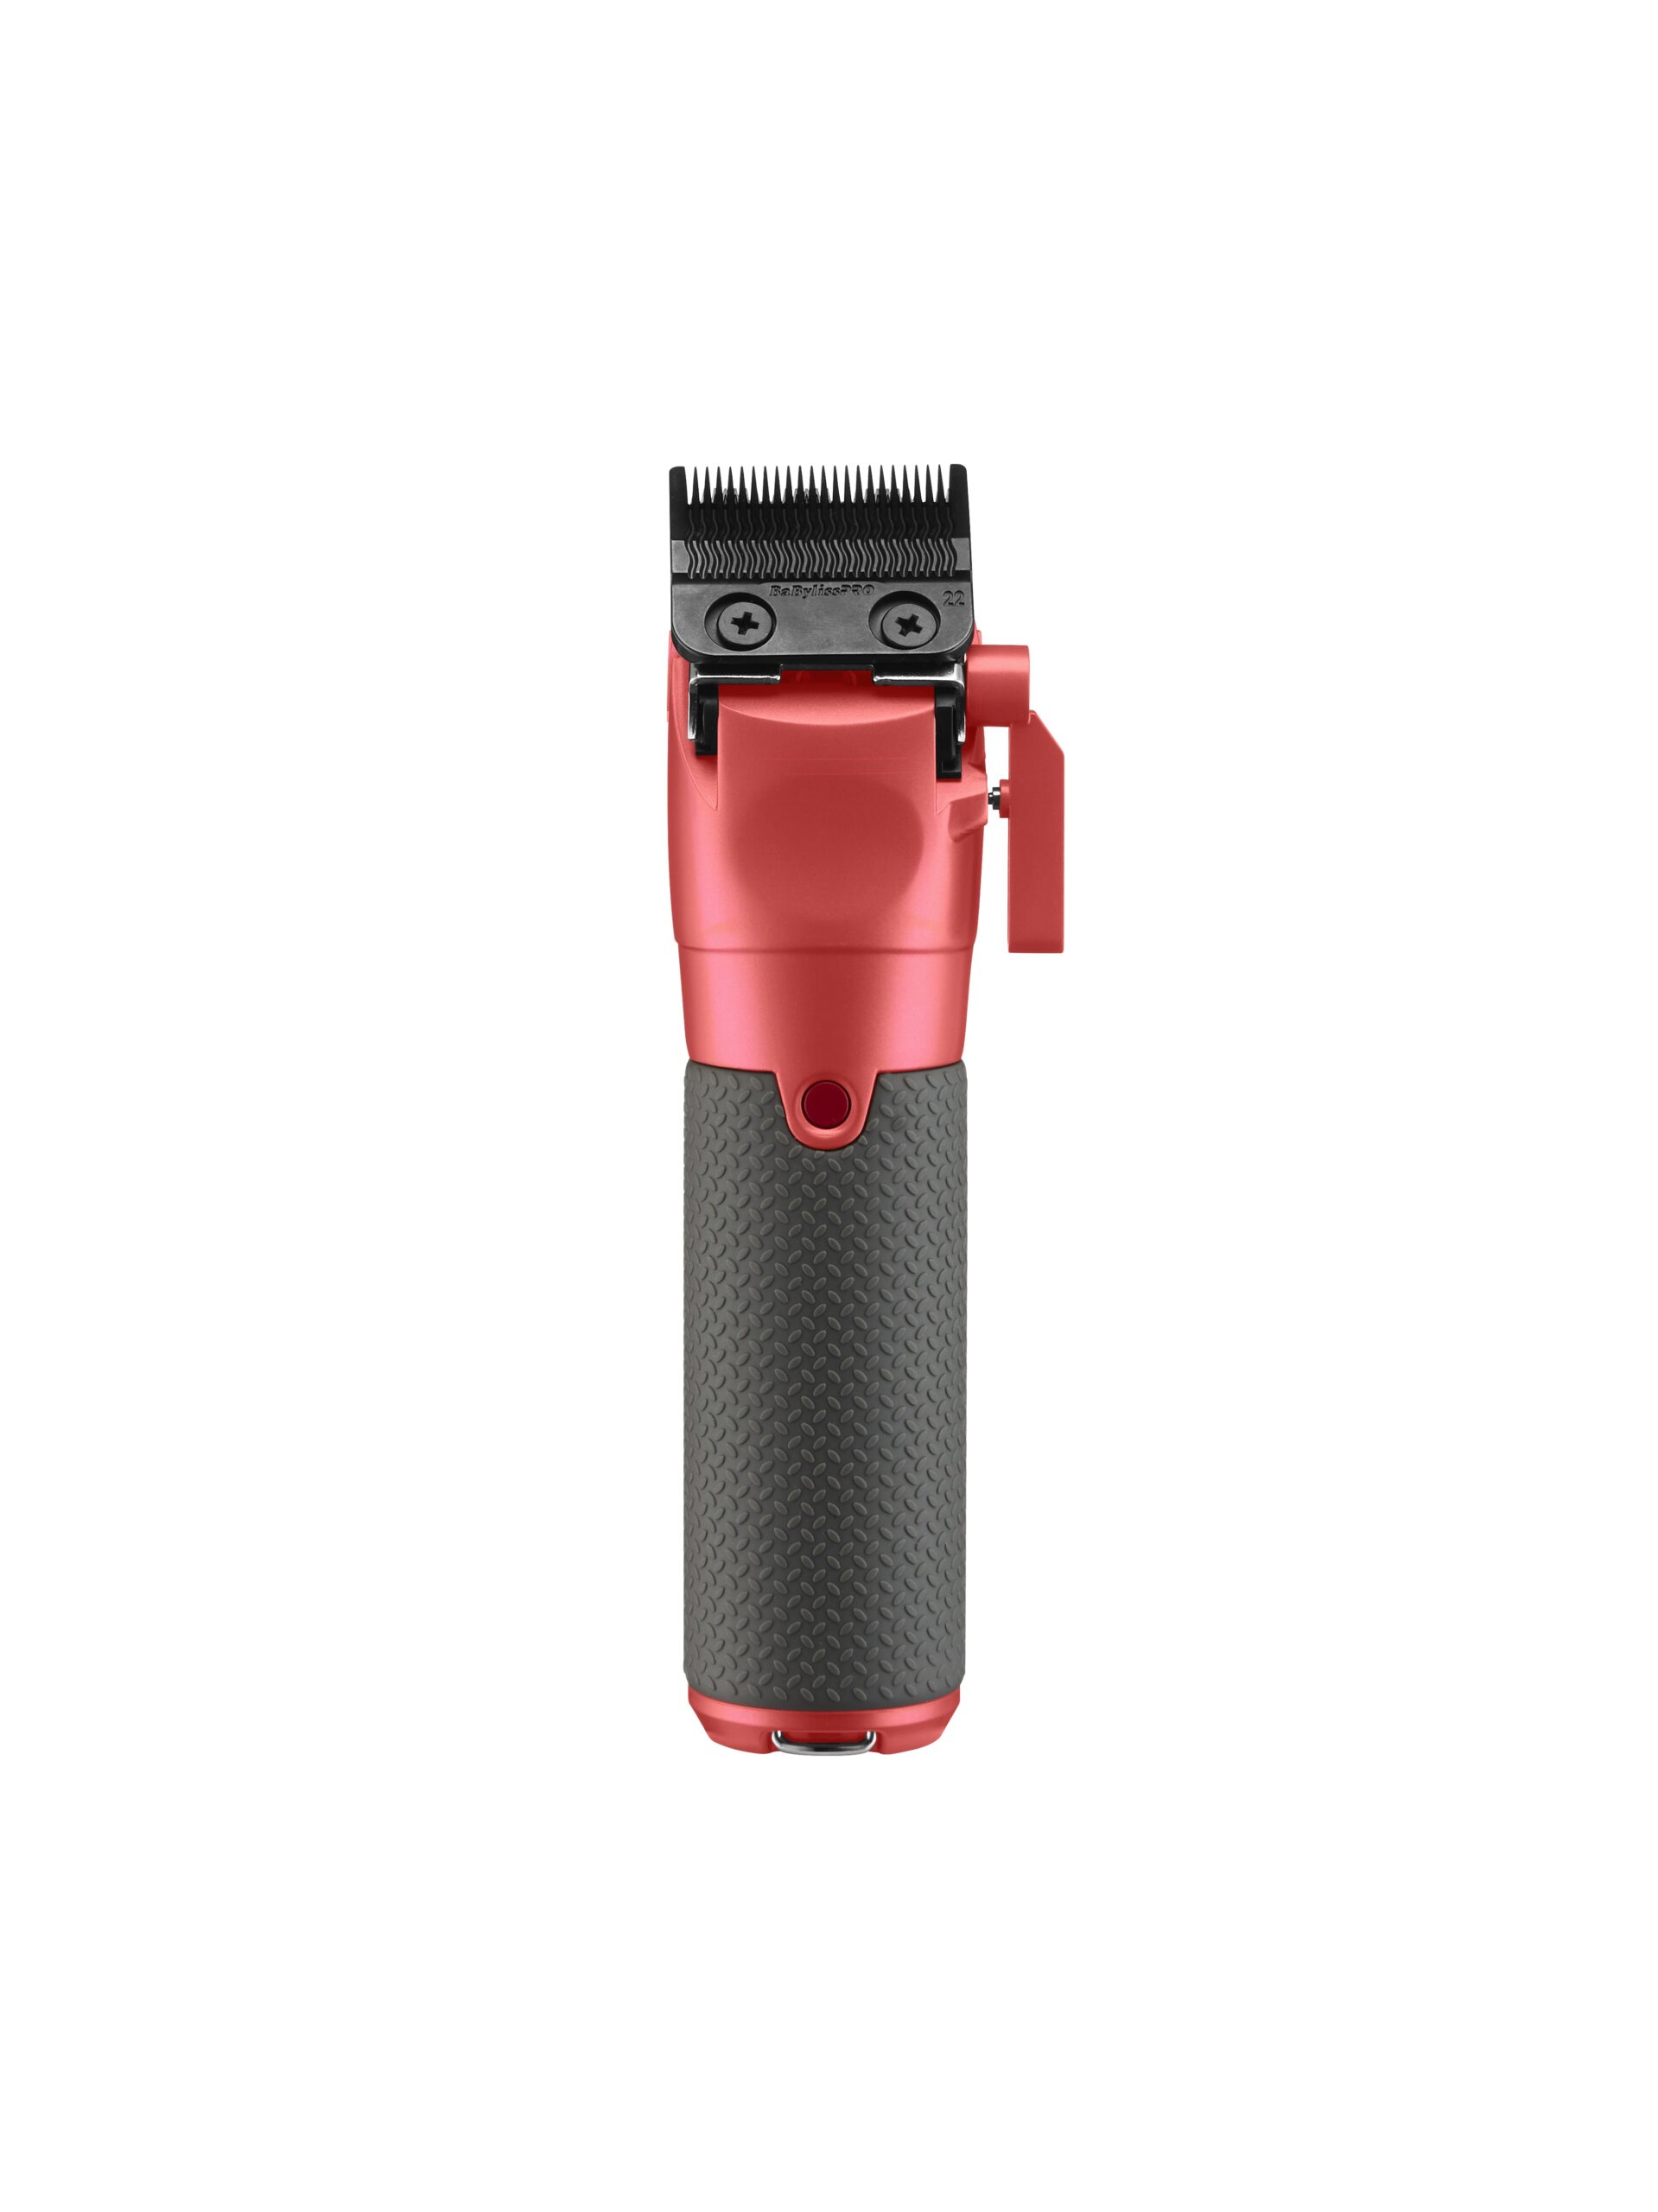 BabylissPro FXOne Limited Edition Matte Deep Orange Clipper (TOOL ONLY) #LFX899OC - Back View